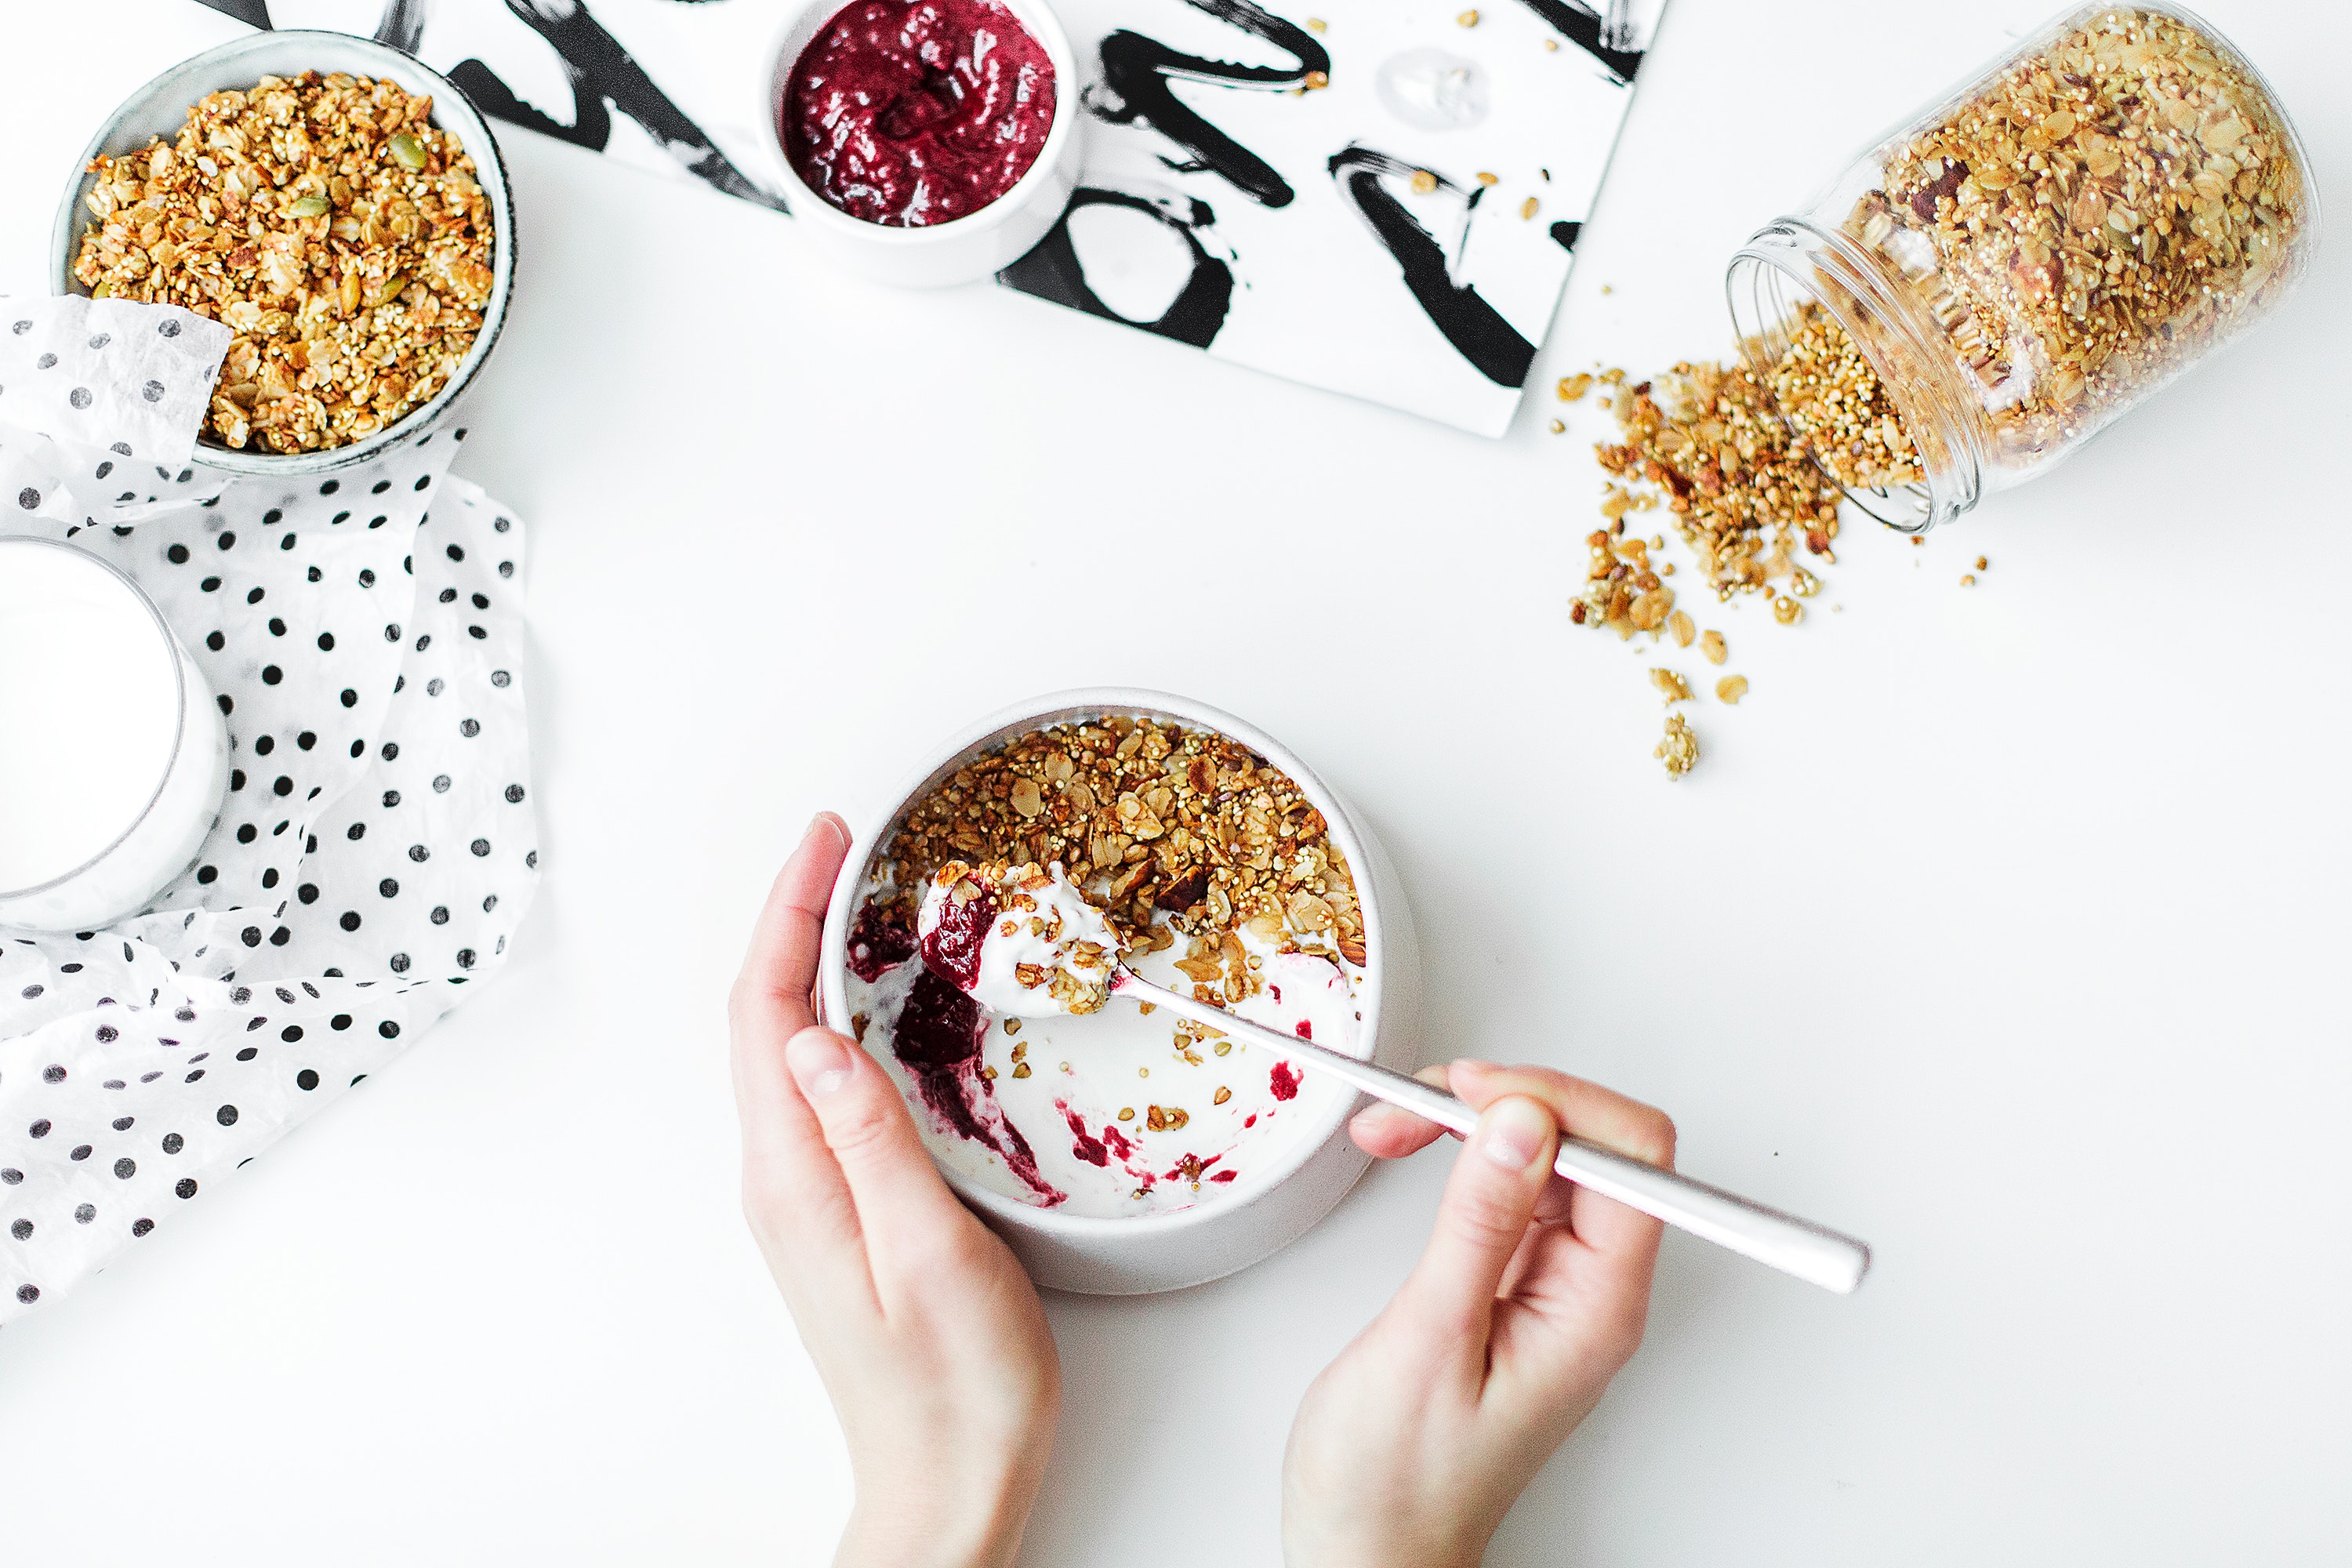 Person Mixing Cereal, Milk, and Strawberry Jam on White Ceramic Bowl, From above, Table, Sweet, Spoon, HQ Photo